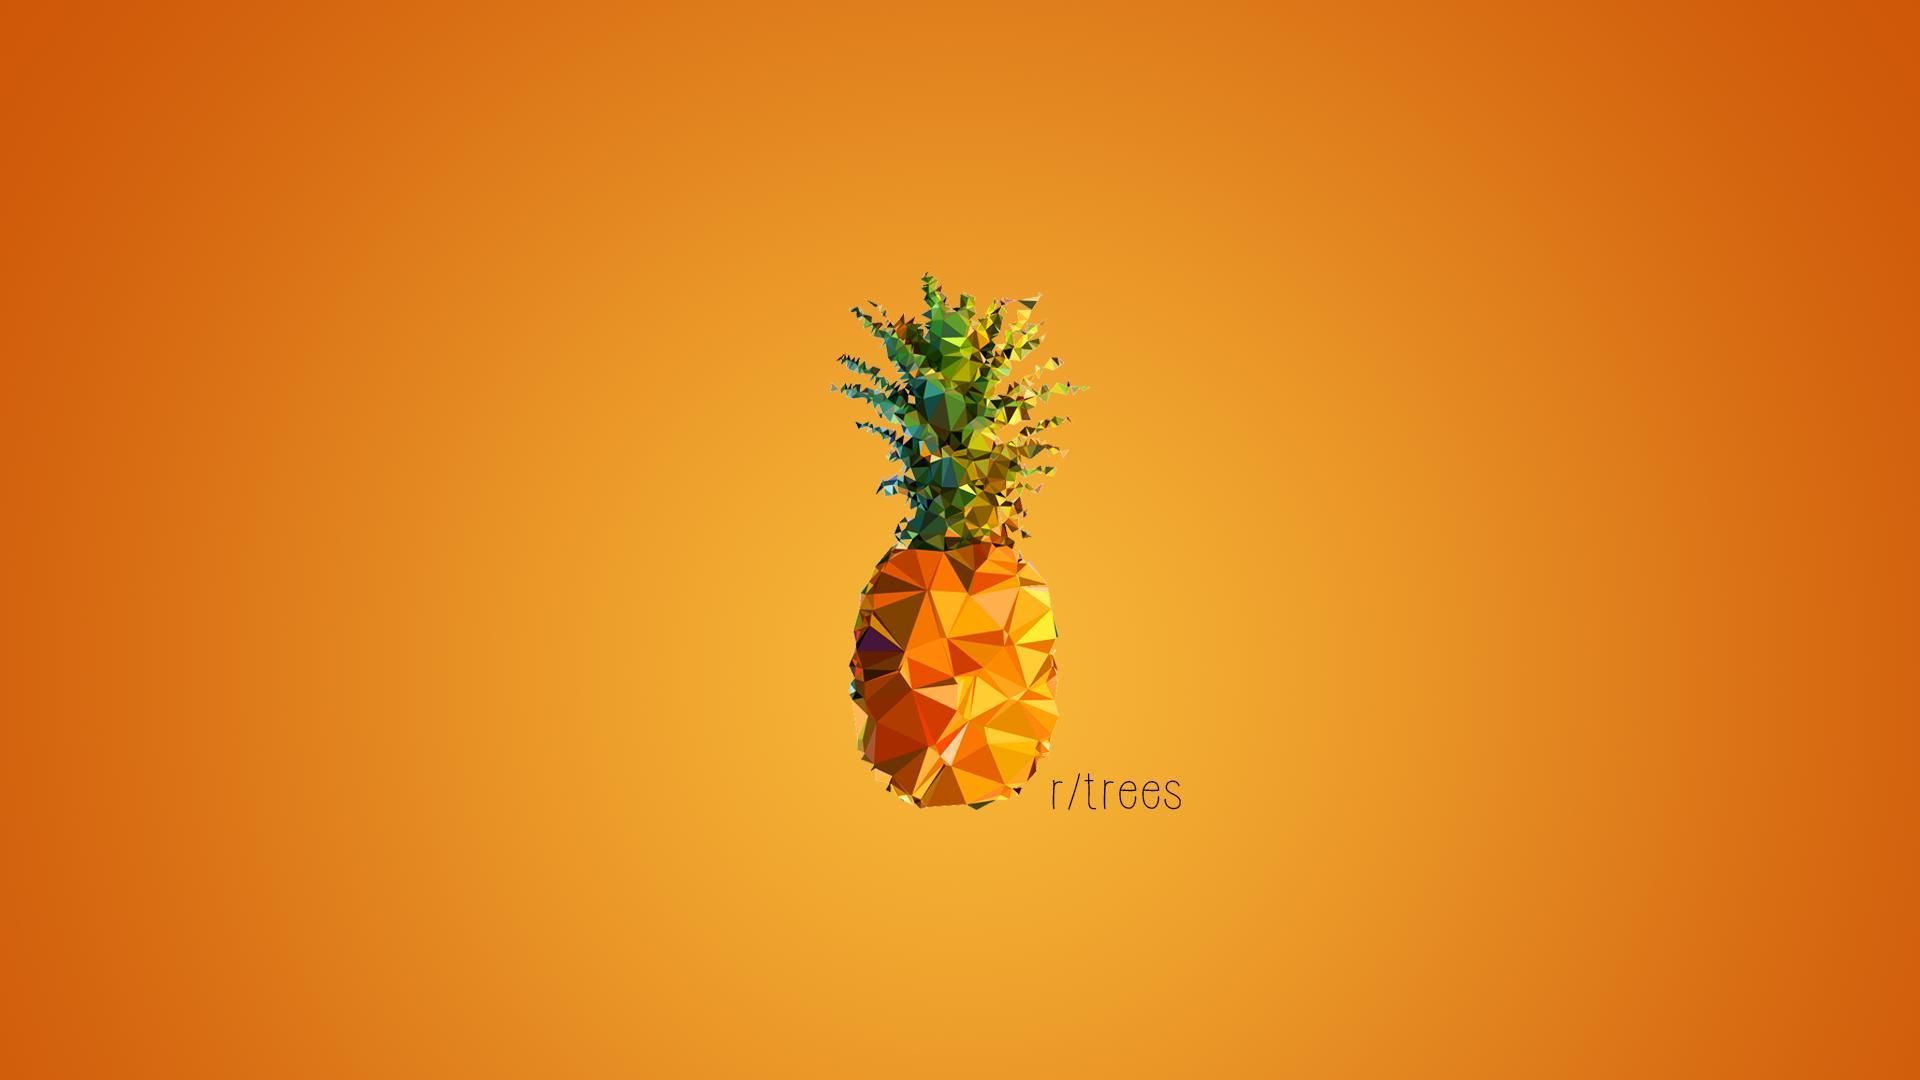 Got high, made a wallpaper for you guys! : trees